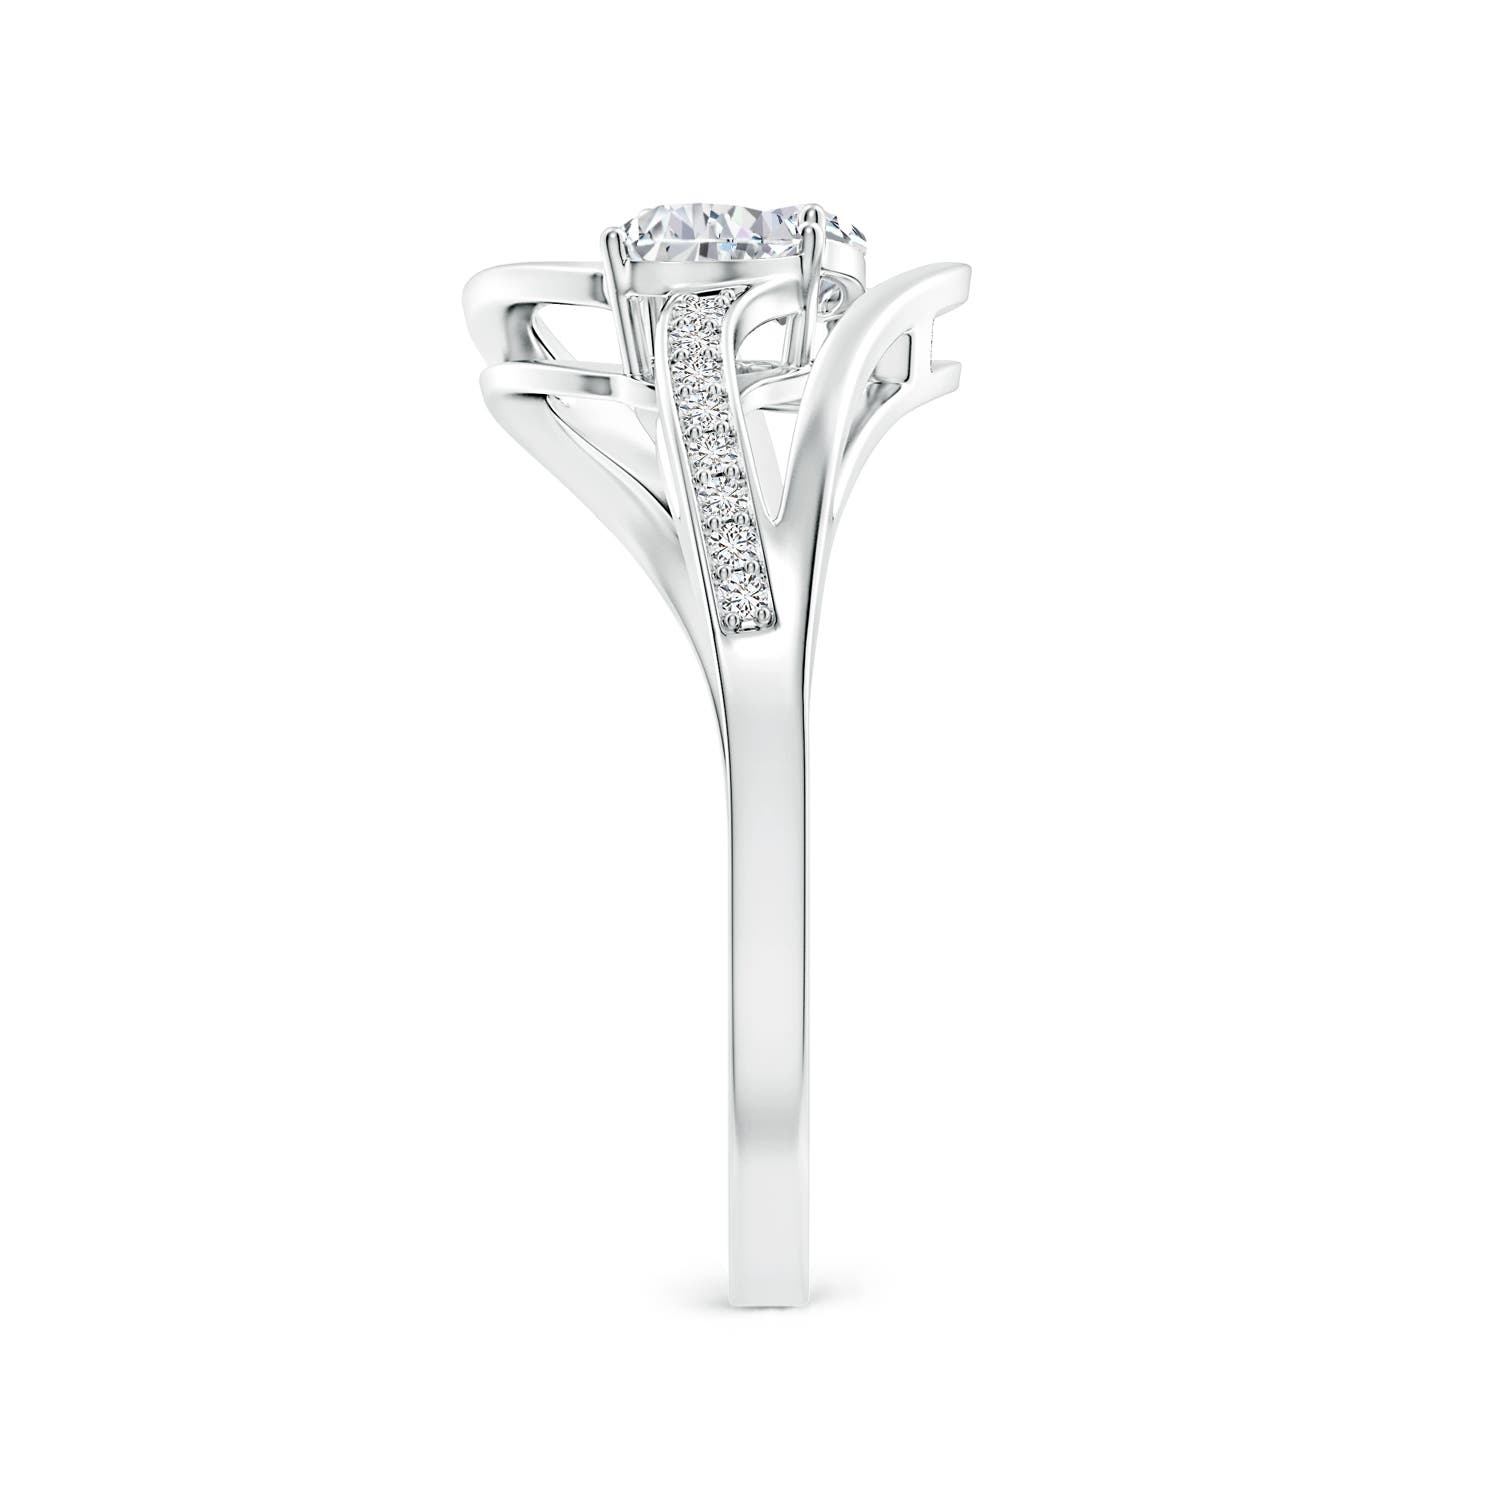 H, SI2 / 0.45 CT / 14 KT White Gold